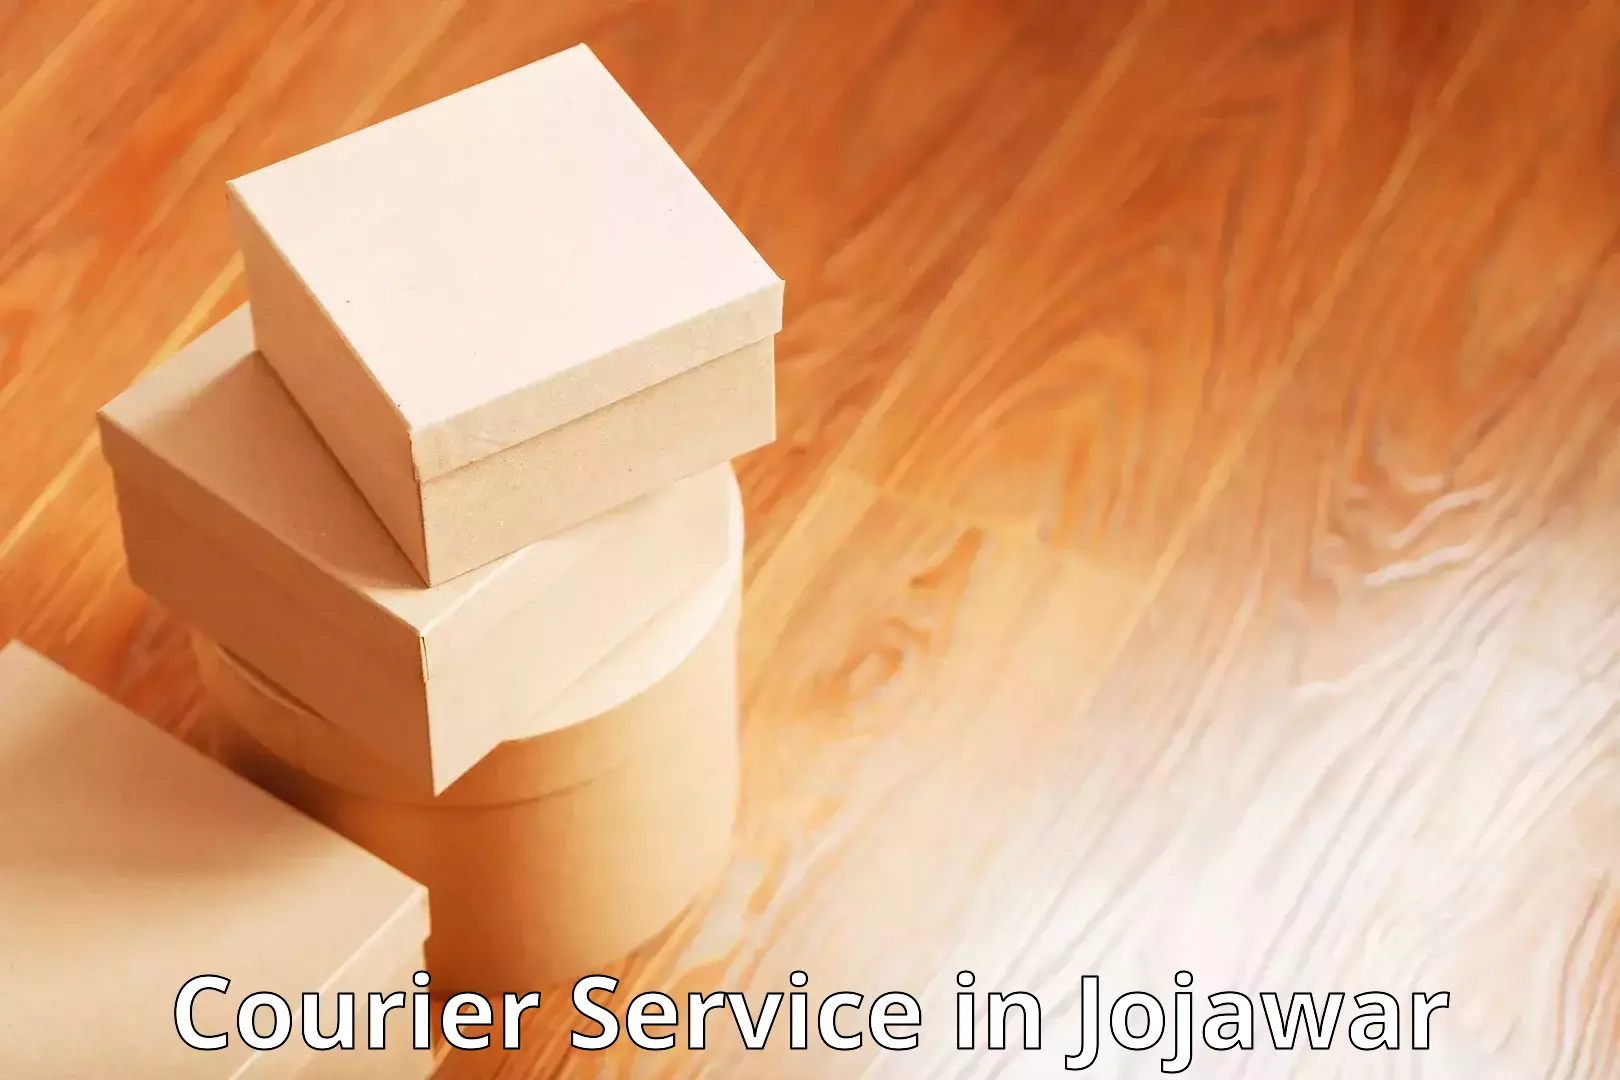 Holiday shipping services in Jojawar